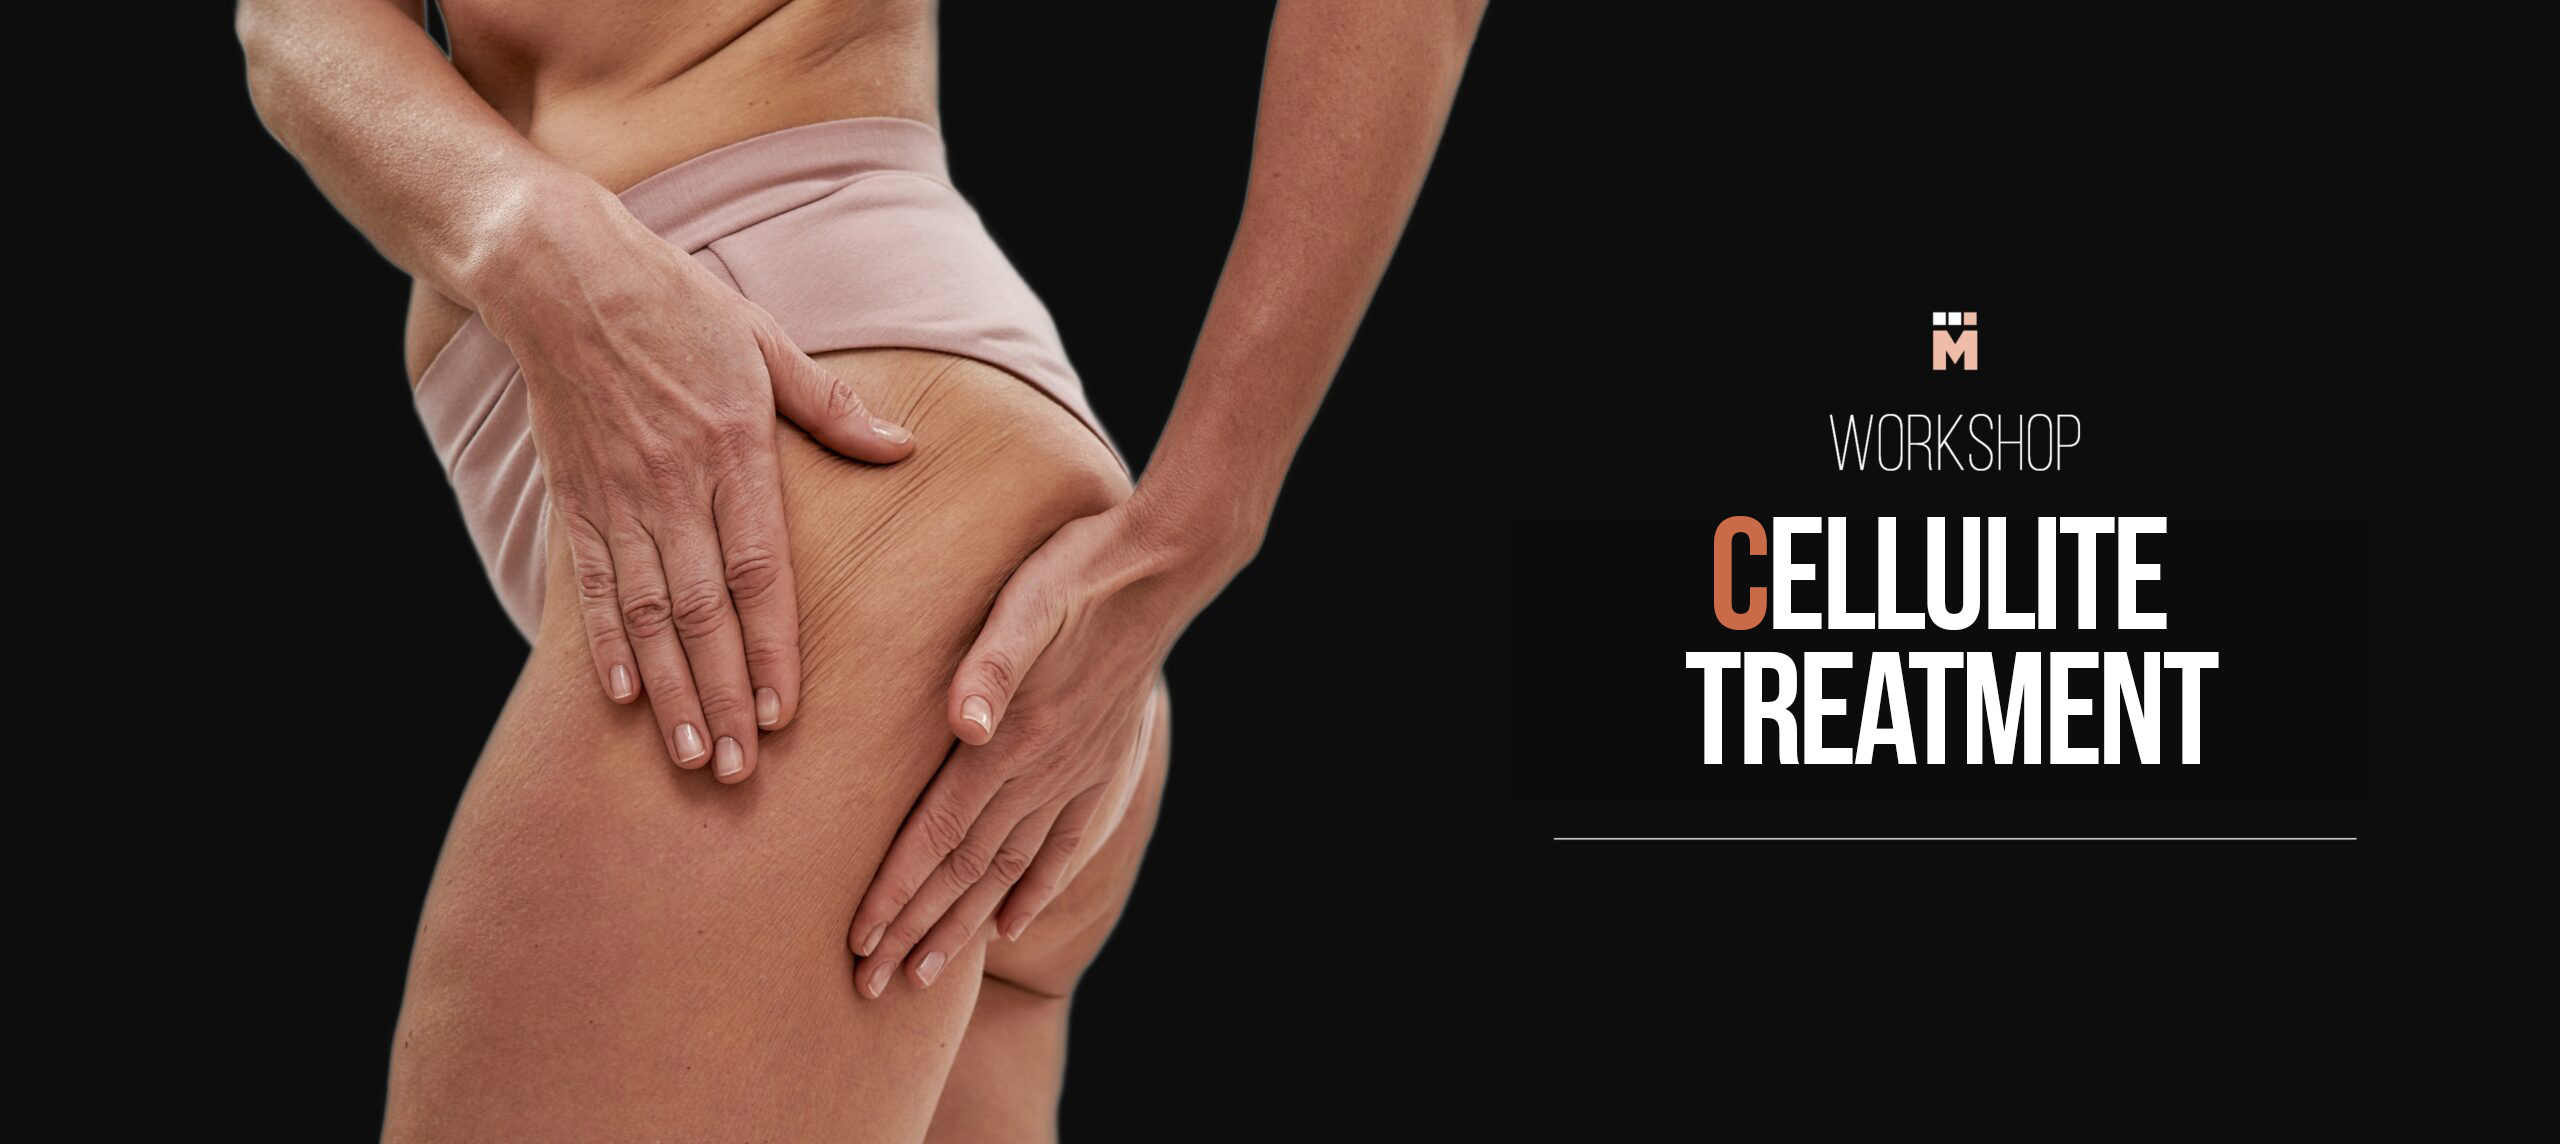 Medical-casting-agency-model-recruiting-workshop-cellulite-treatment